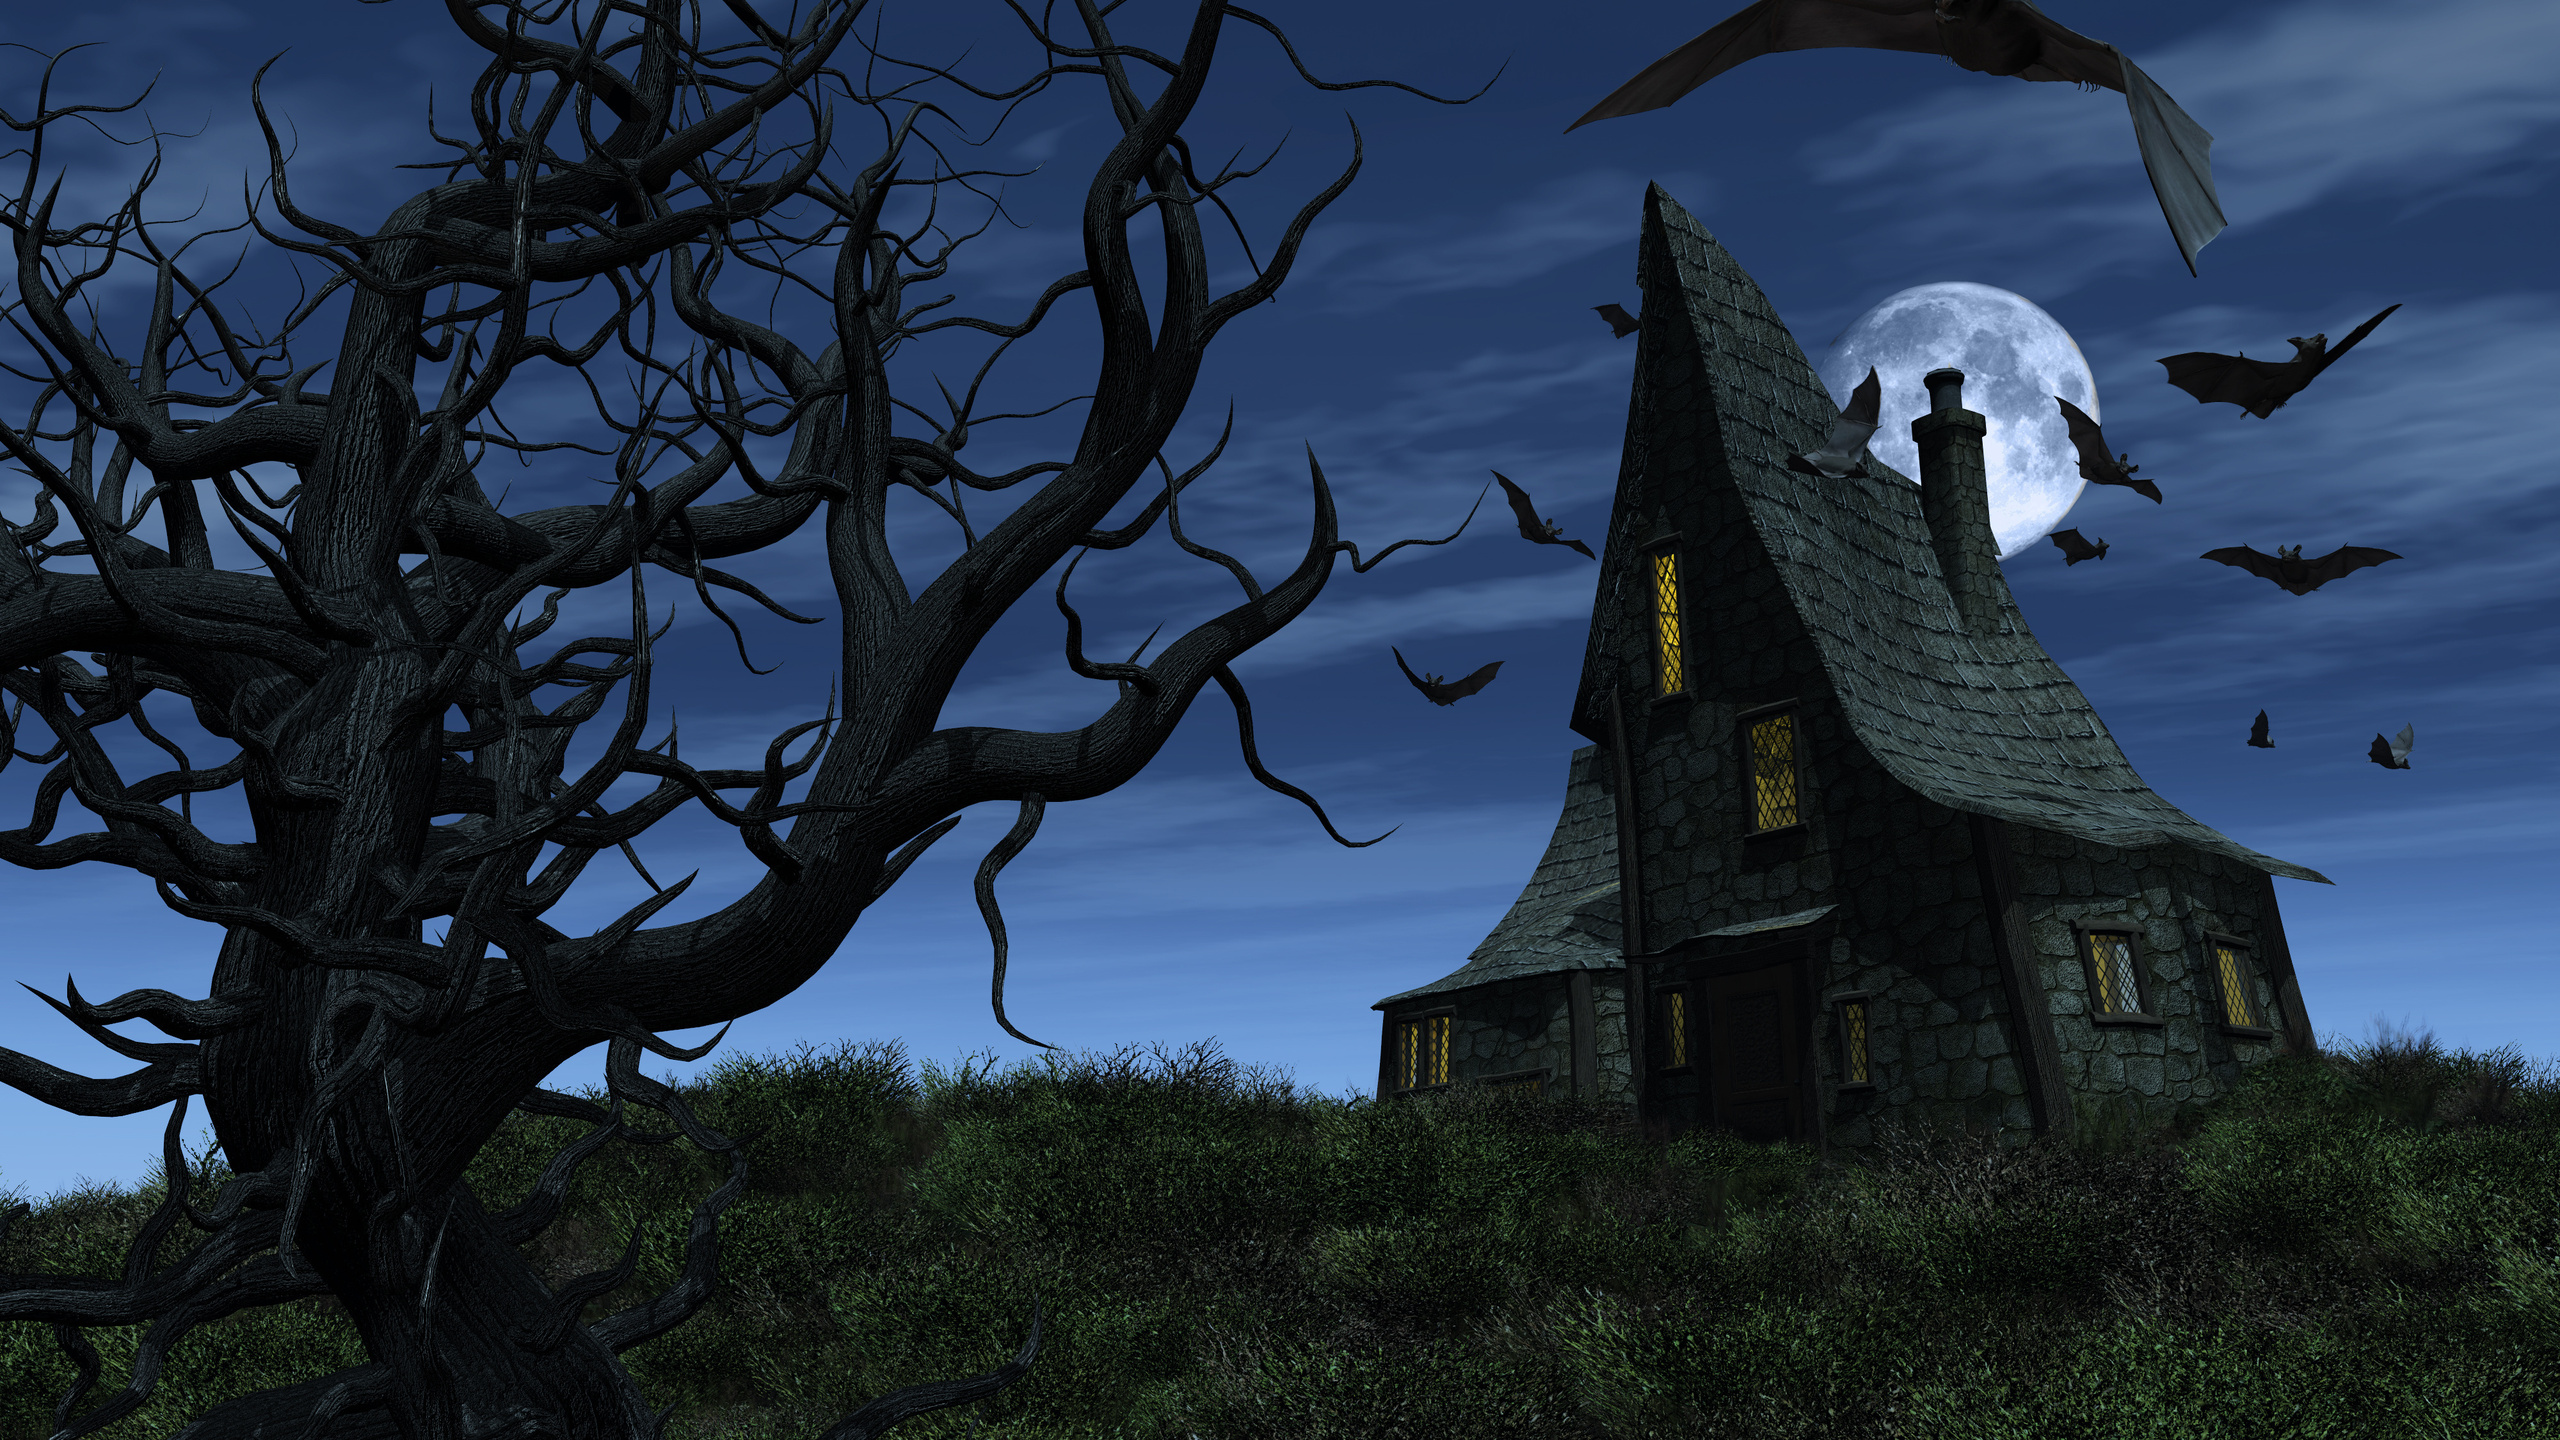 Scary Halloween Wallpapers 4.